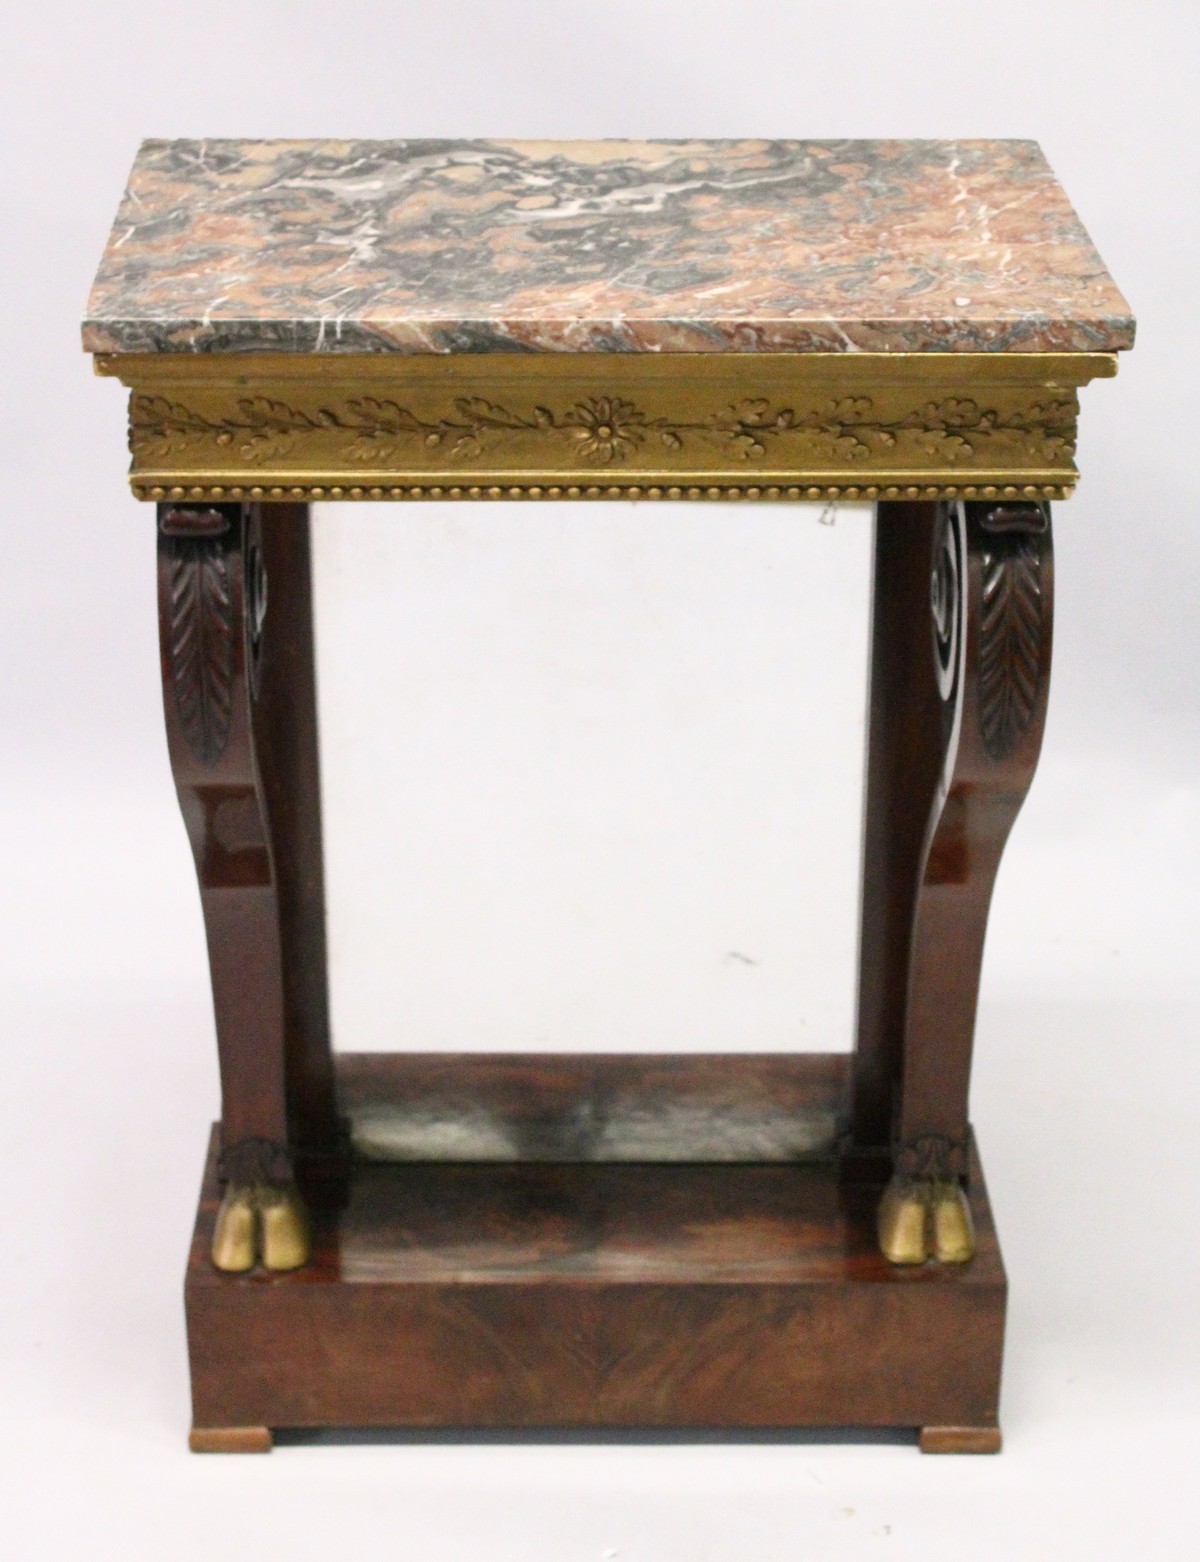 A REGENCY MAHOGANY SMALL PIER/CONSOLE TABLE, with a marble top over an ornate gilded frieze, on a